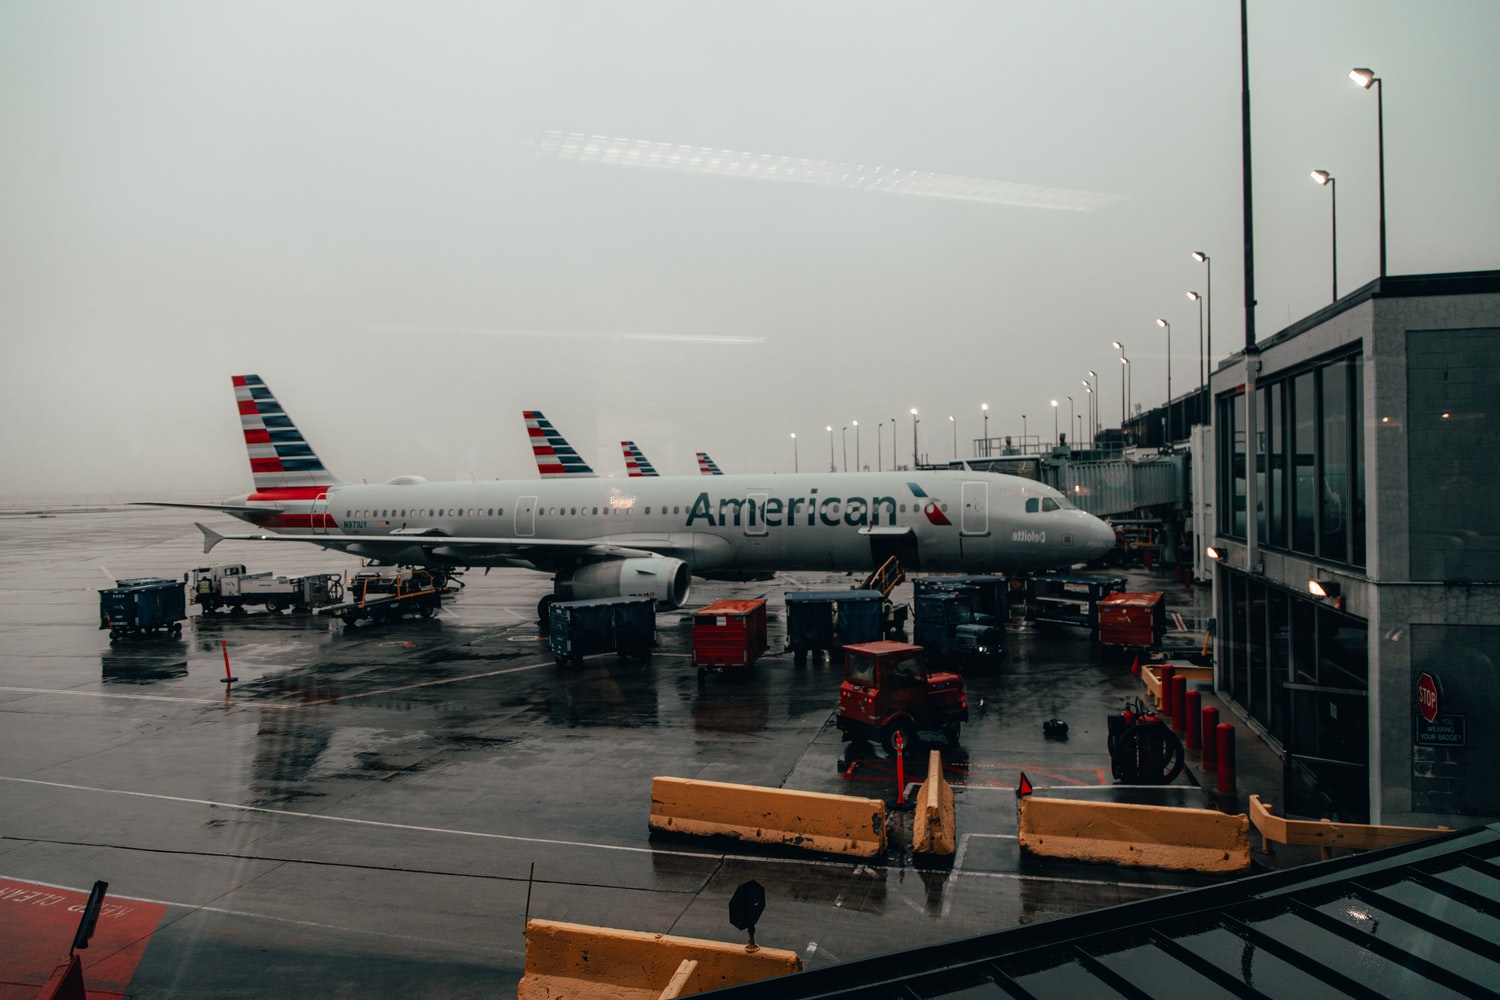 American Airlines planes on tarmac